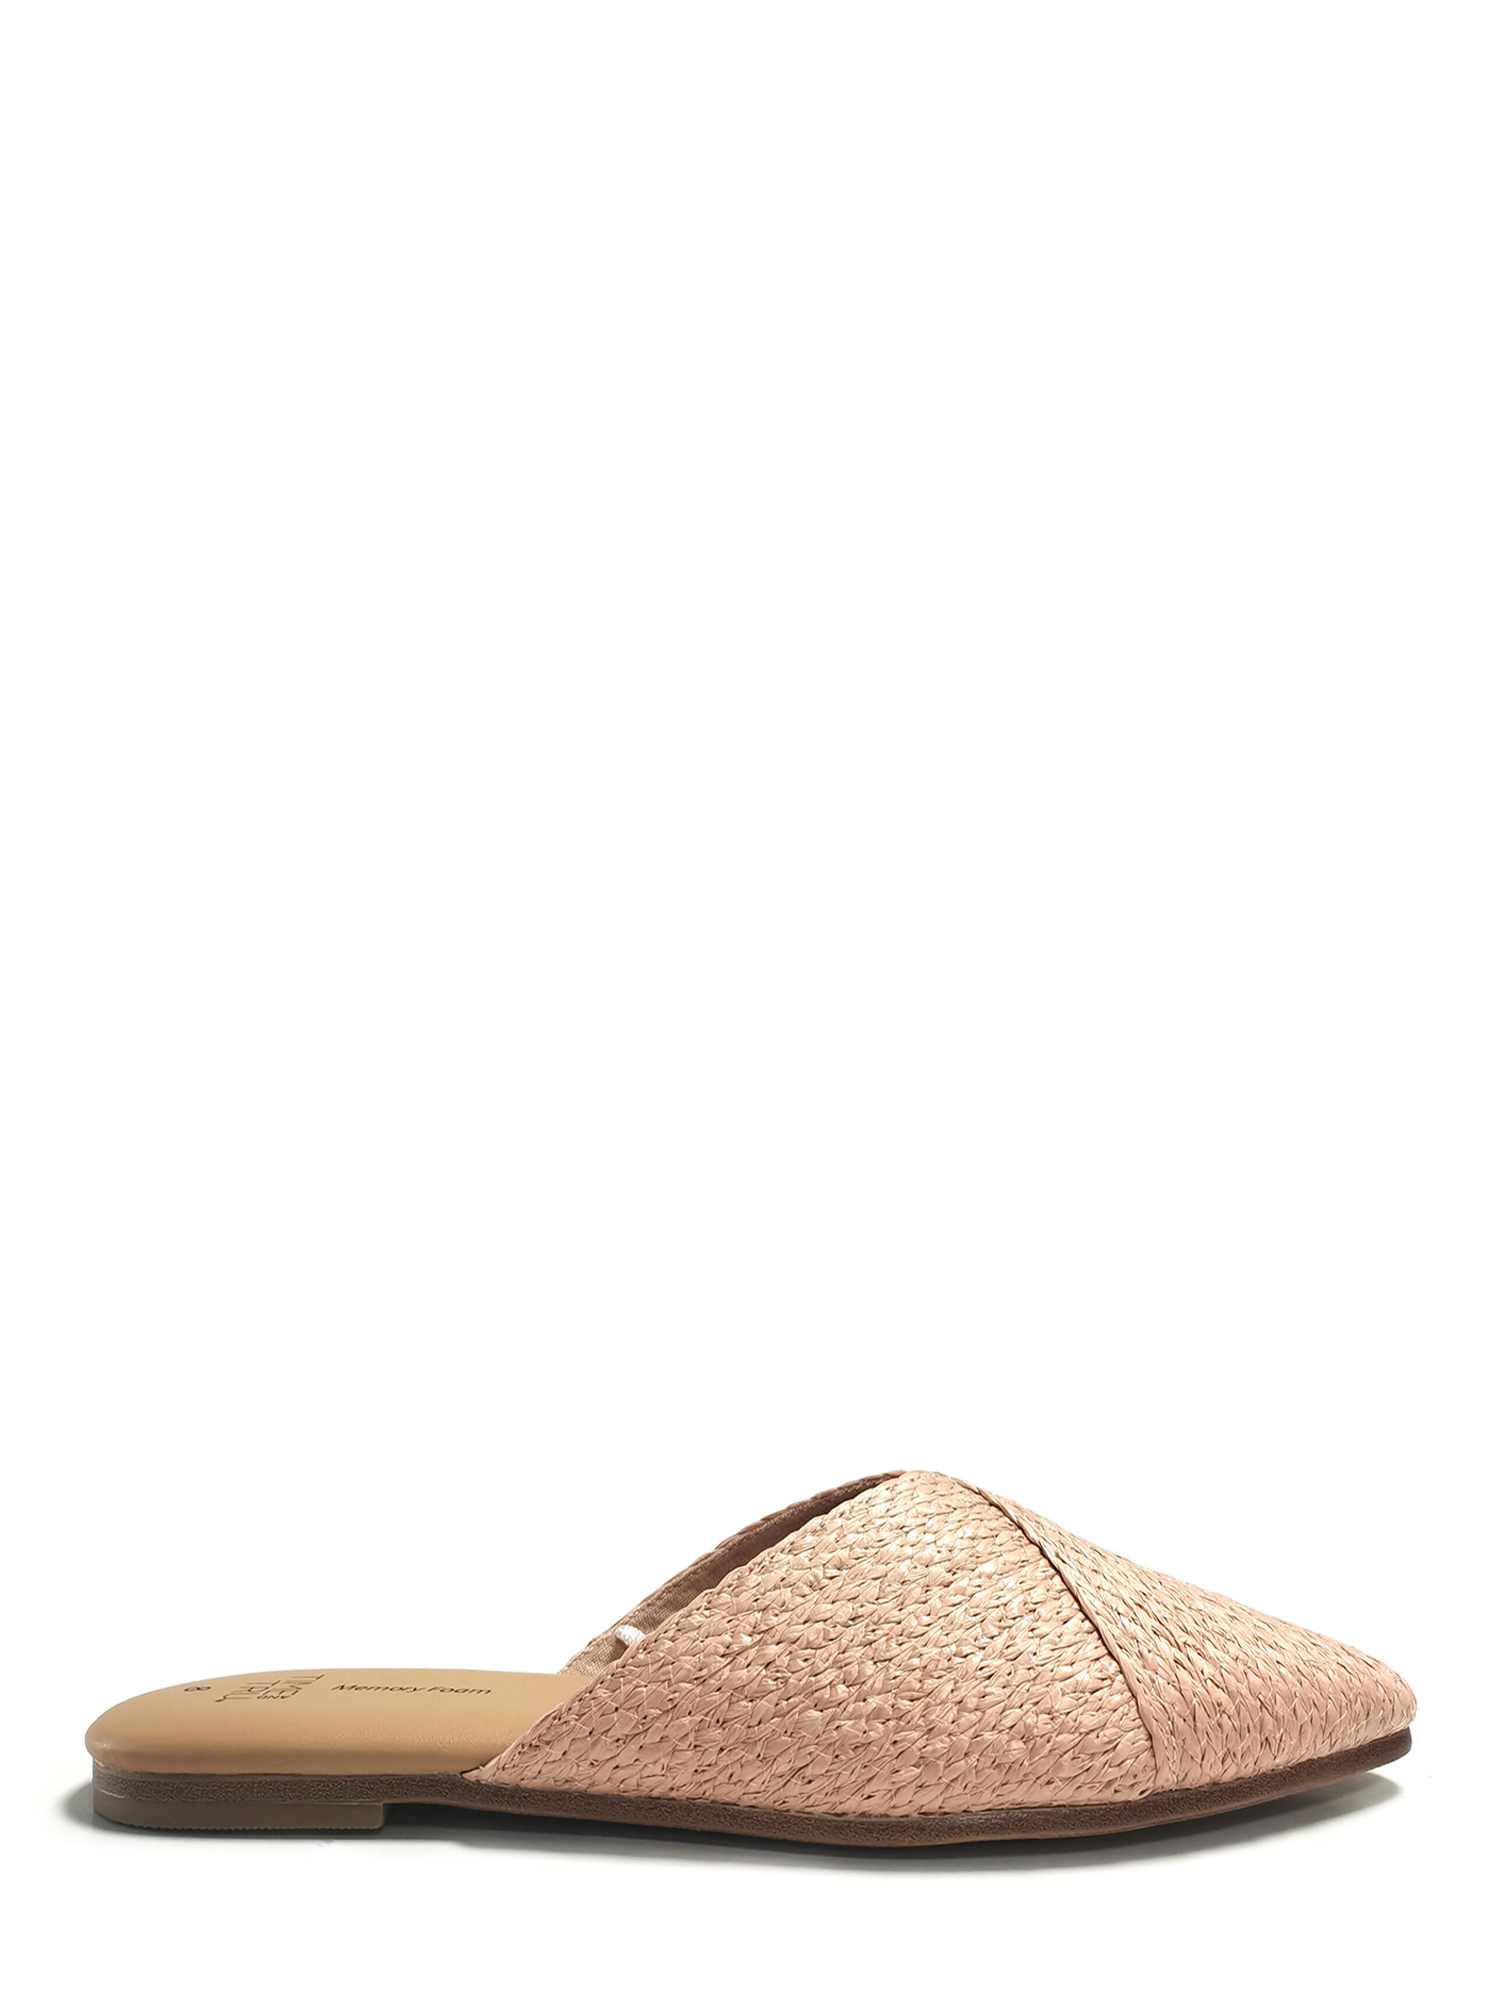 Time And Tru Women's Raffia Mule Shoes - image 2 of 6